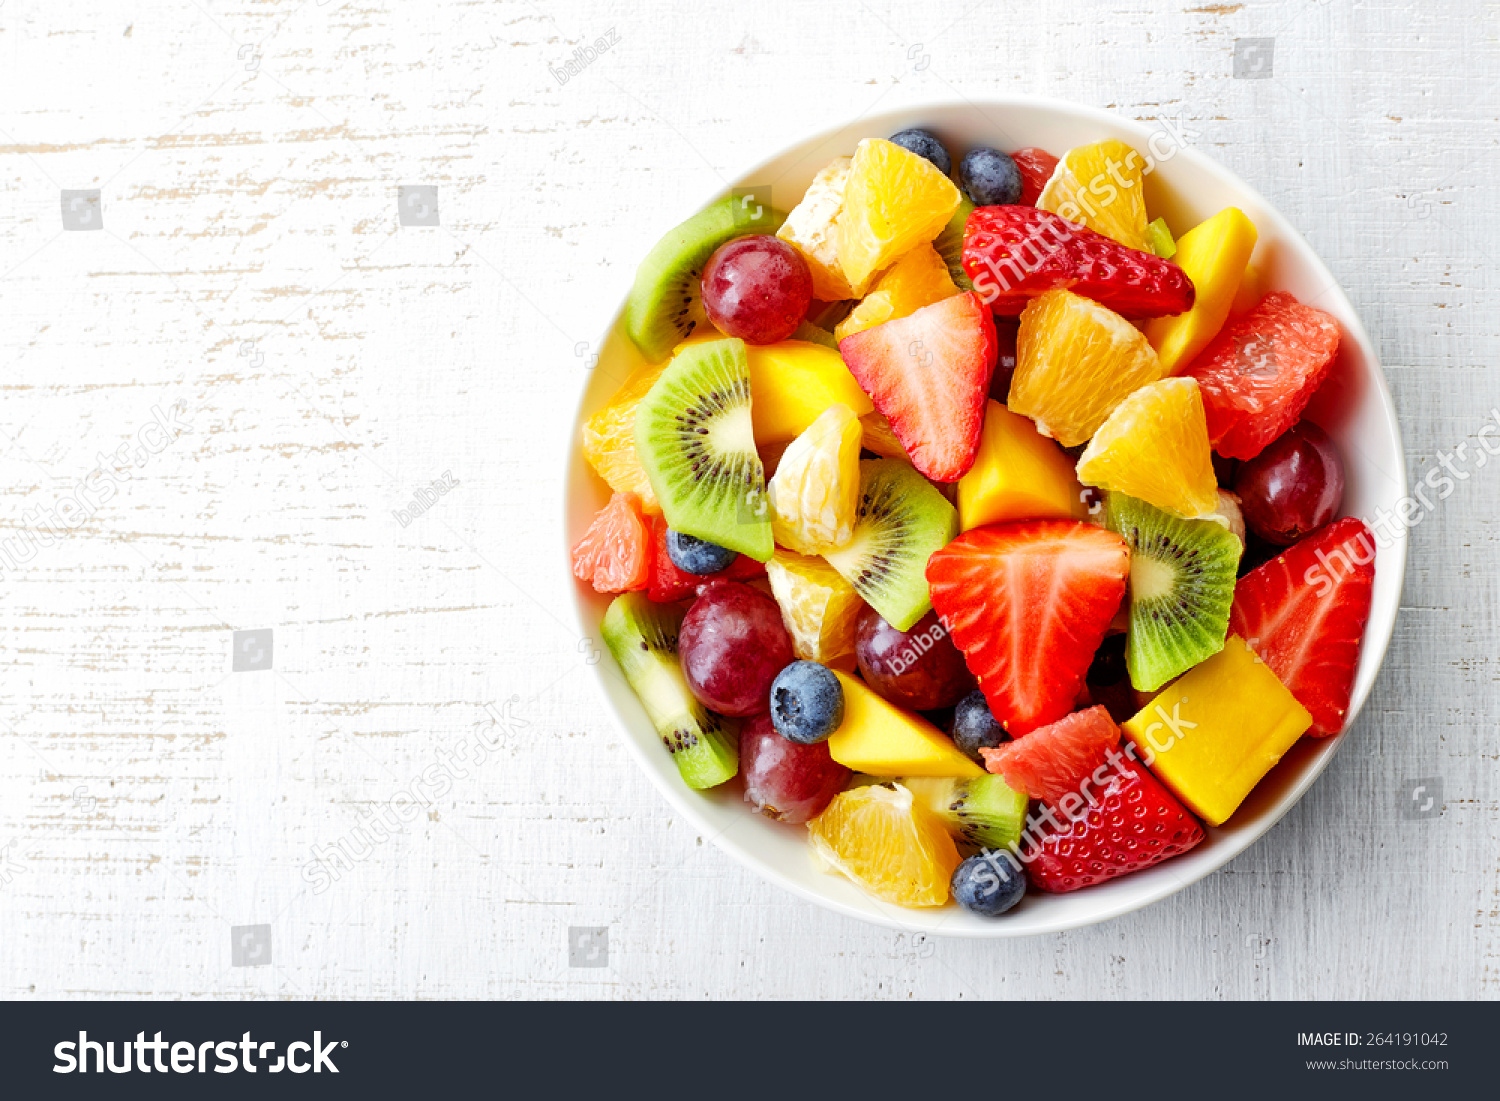 Bowl of healthy fresh fruit salad on wooden background. Top view. #264191042